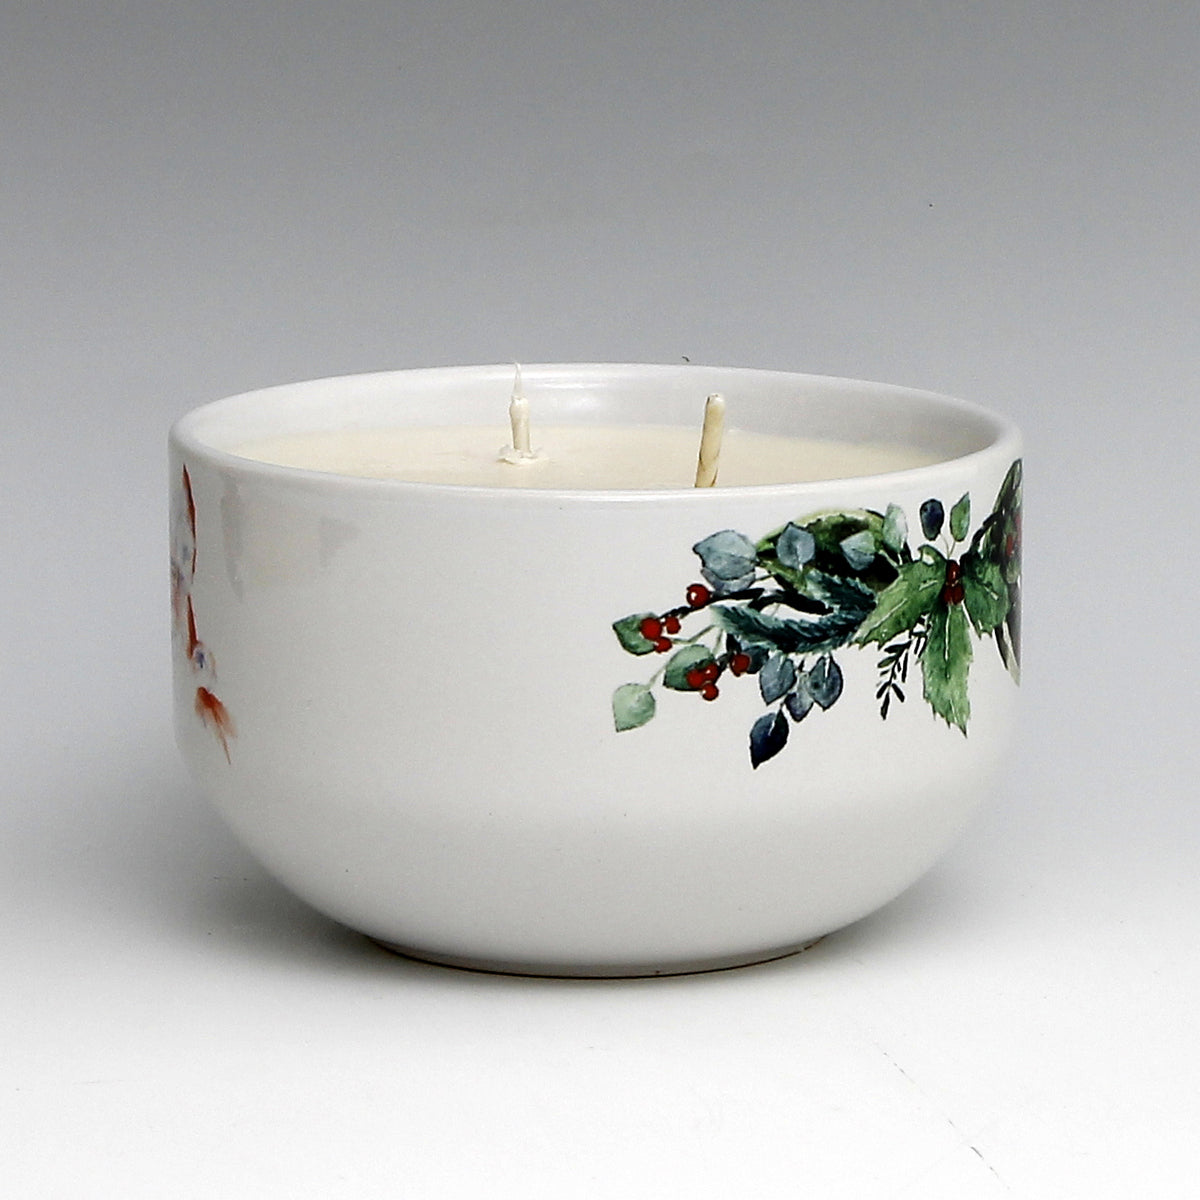 Two Wicks Soy Wax Candle in a Porcelain Bowl - Deruta Style